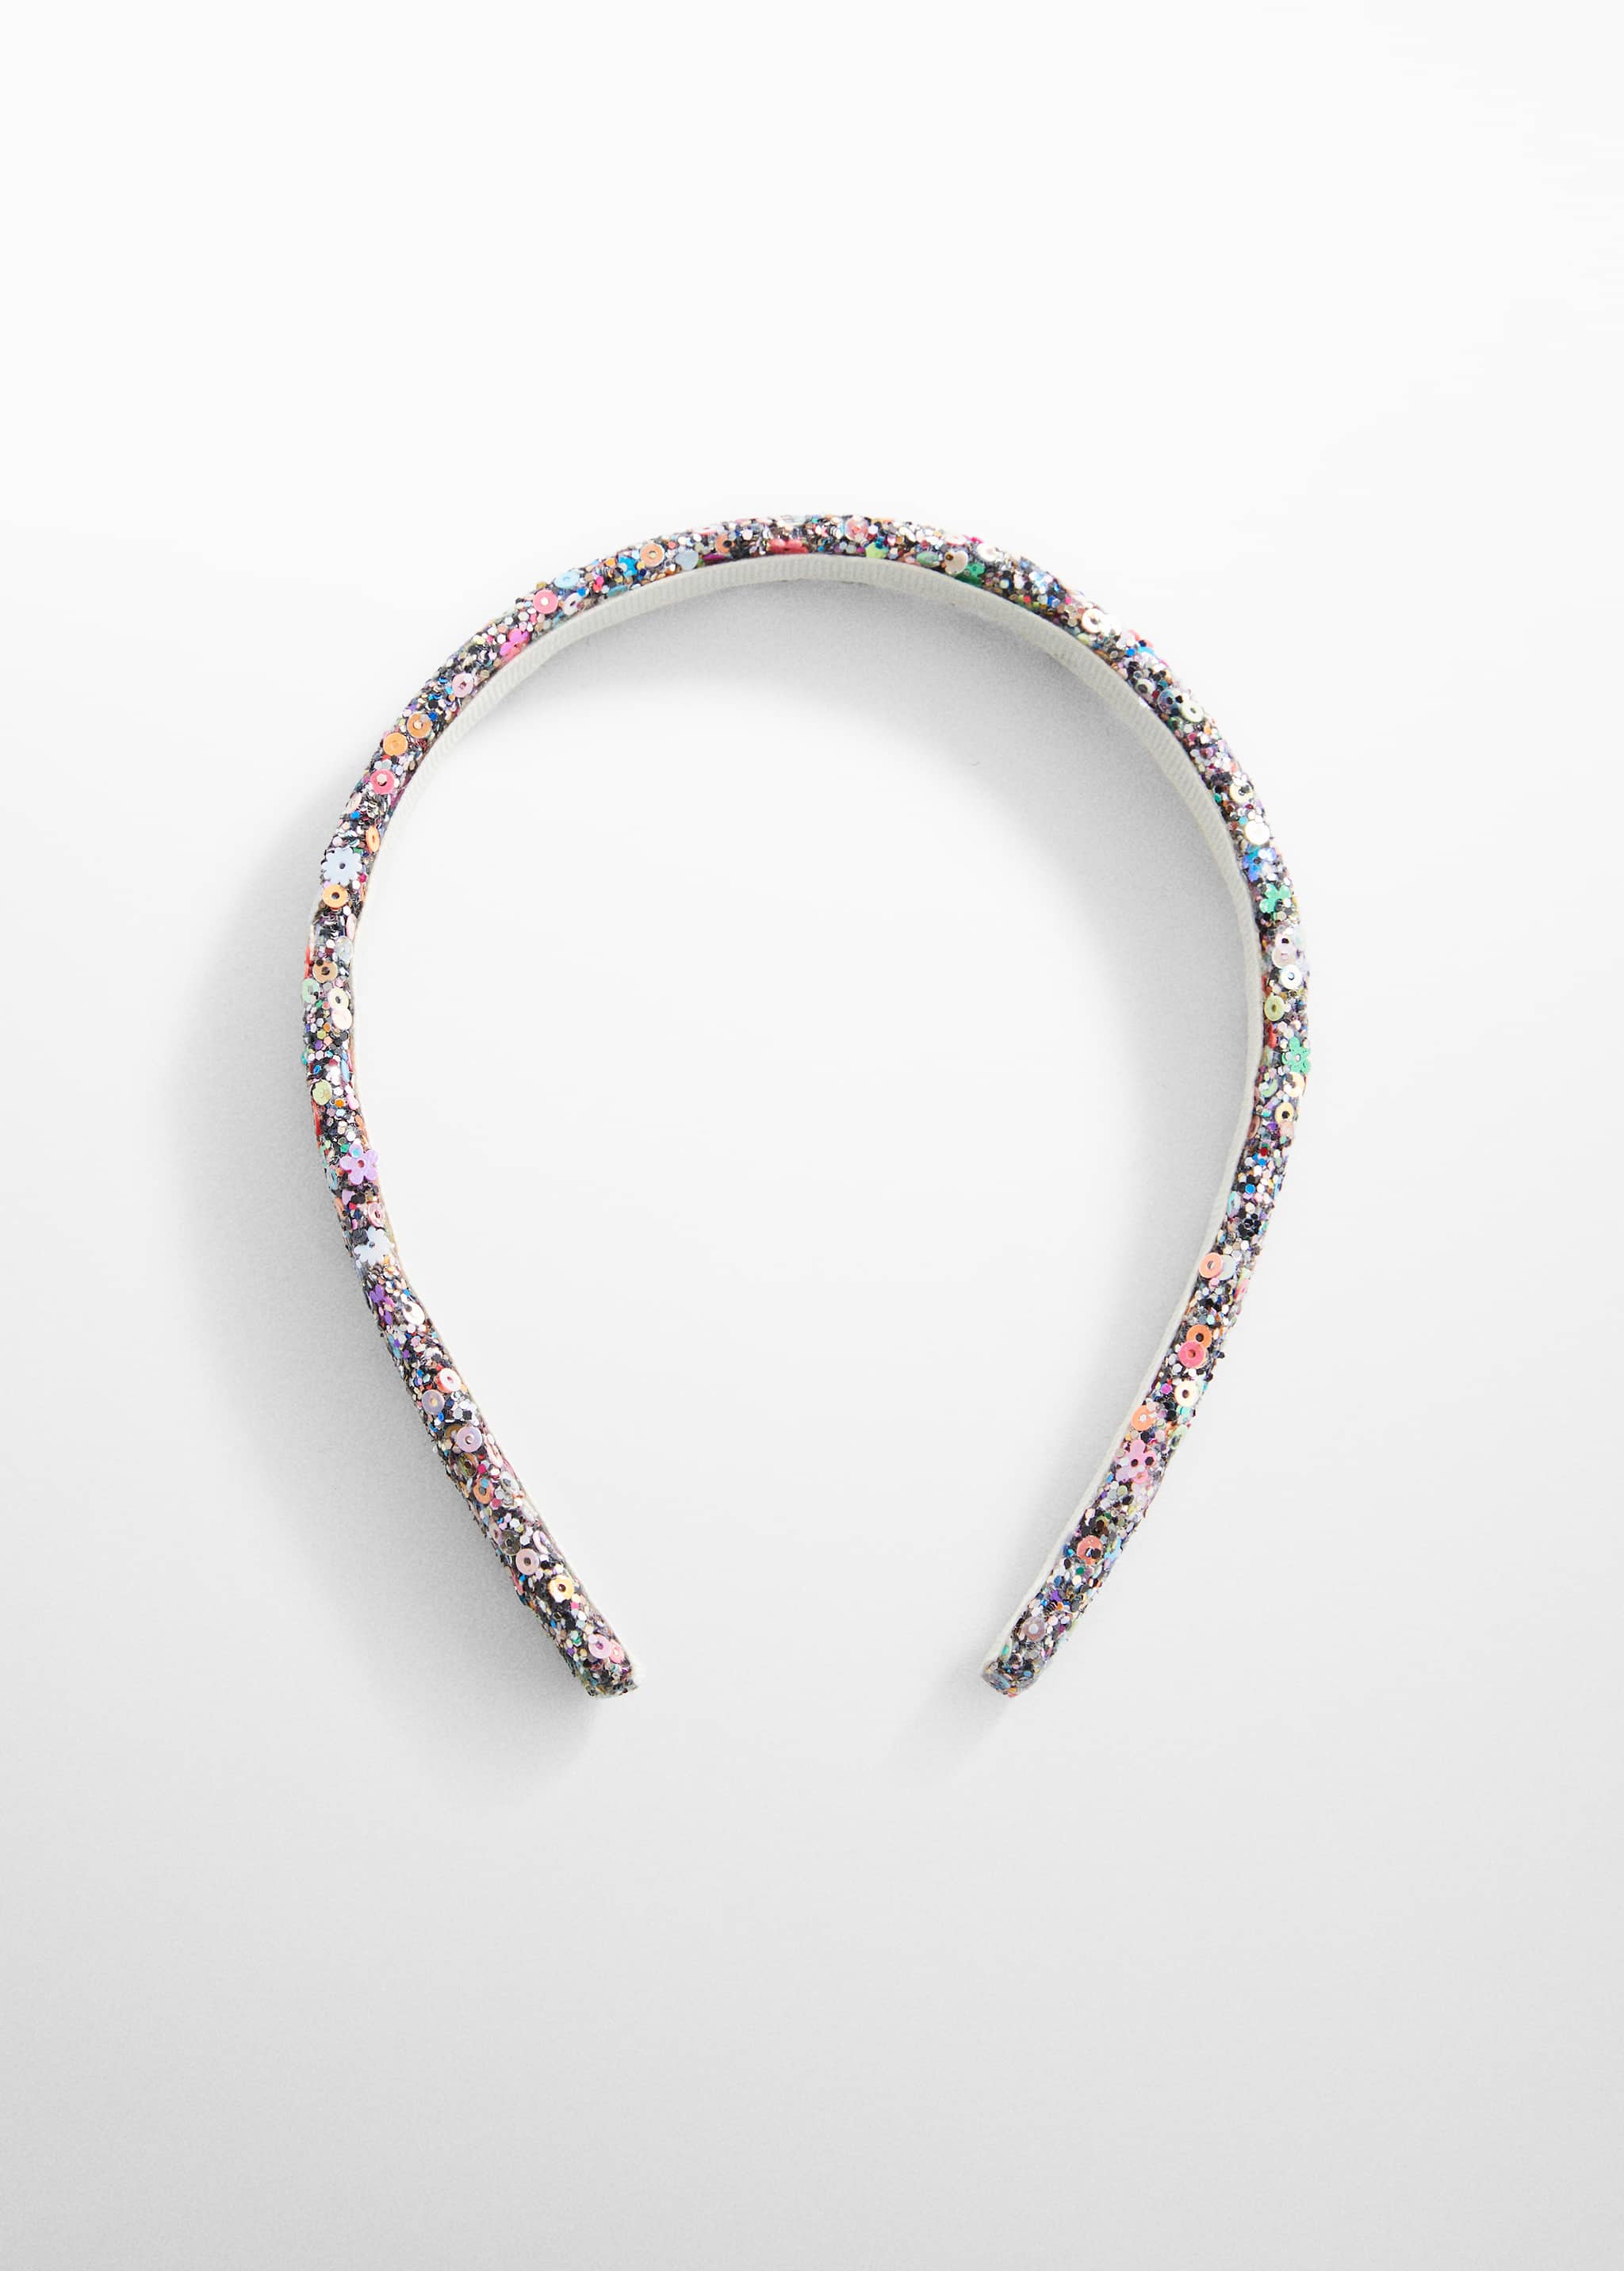 Sequins beads hairband - Article without model